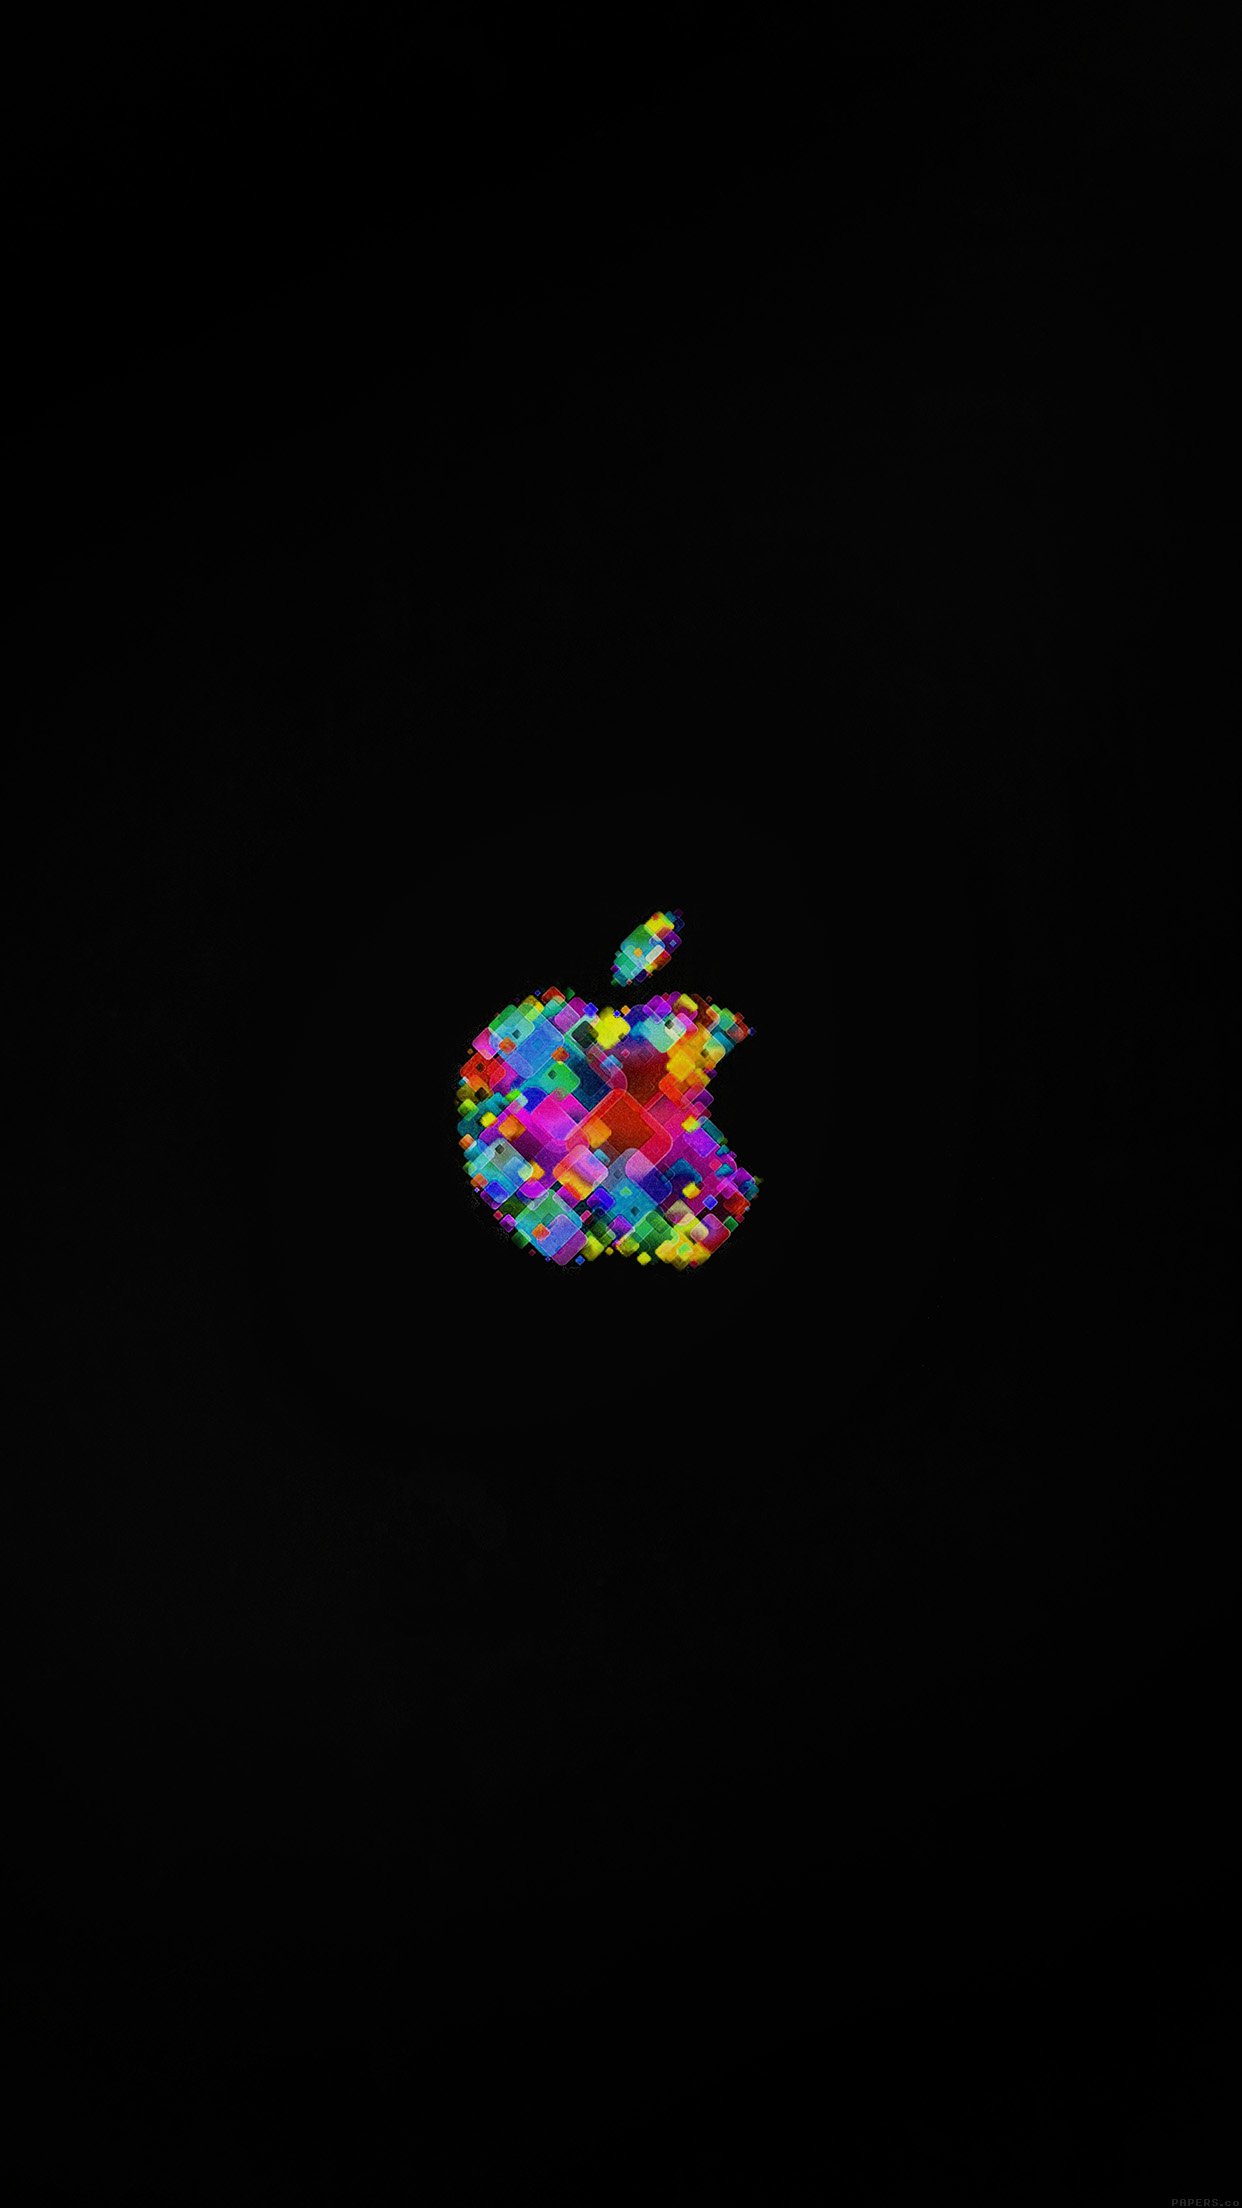 Apple Event Logo Art Dark Minimal Android wallpaper - Android HD wallpapers